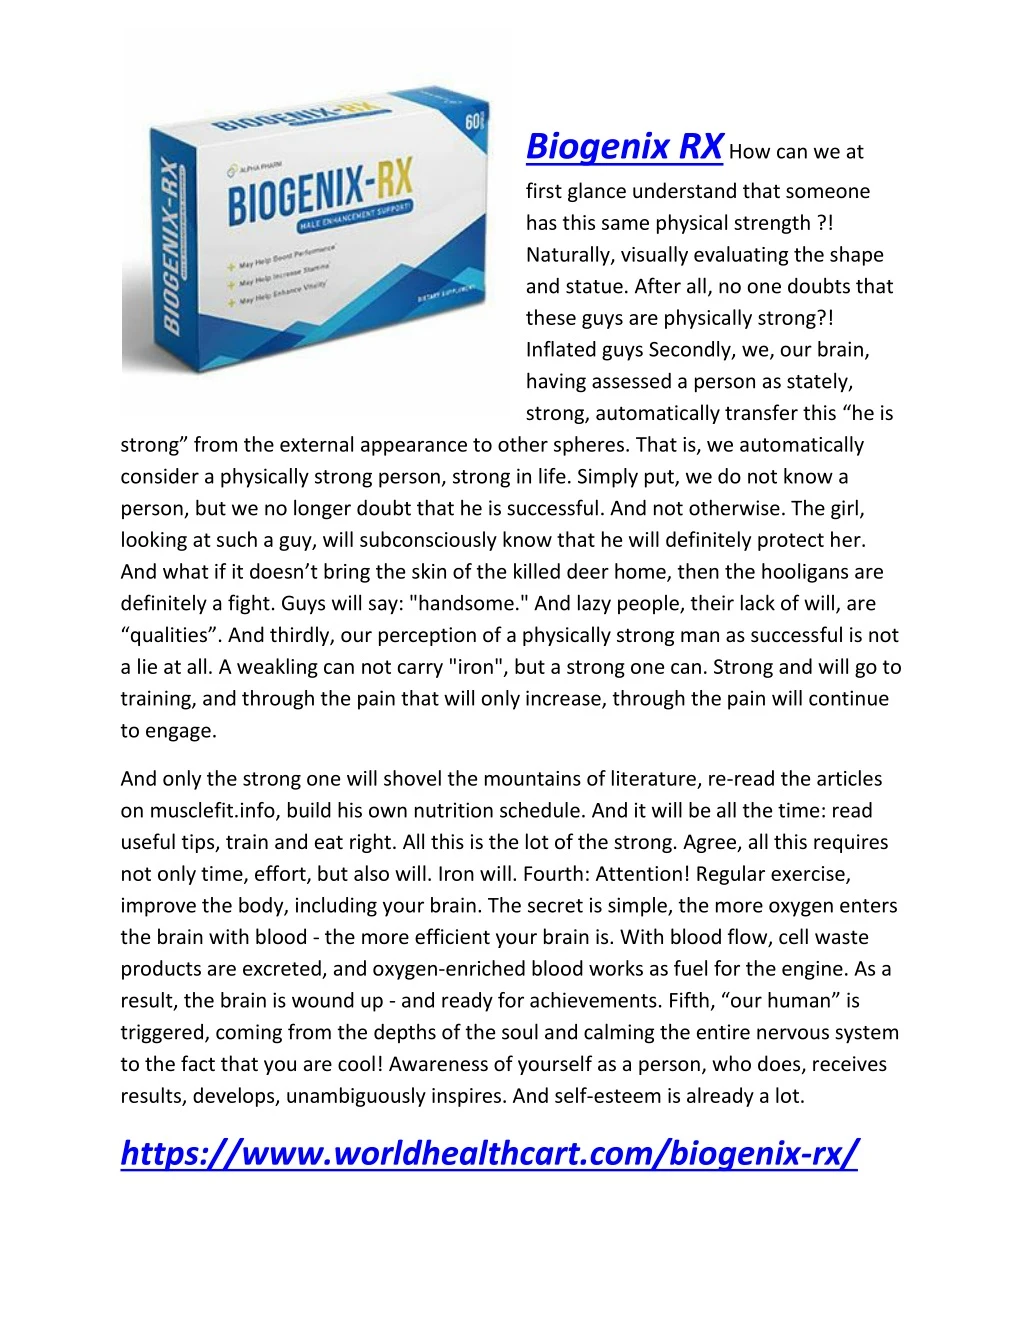 biogenix rx how can we at